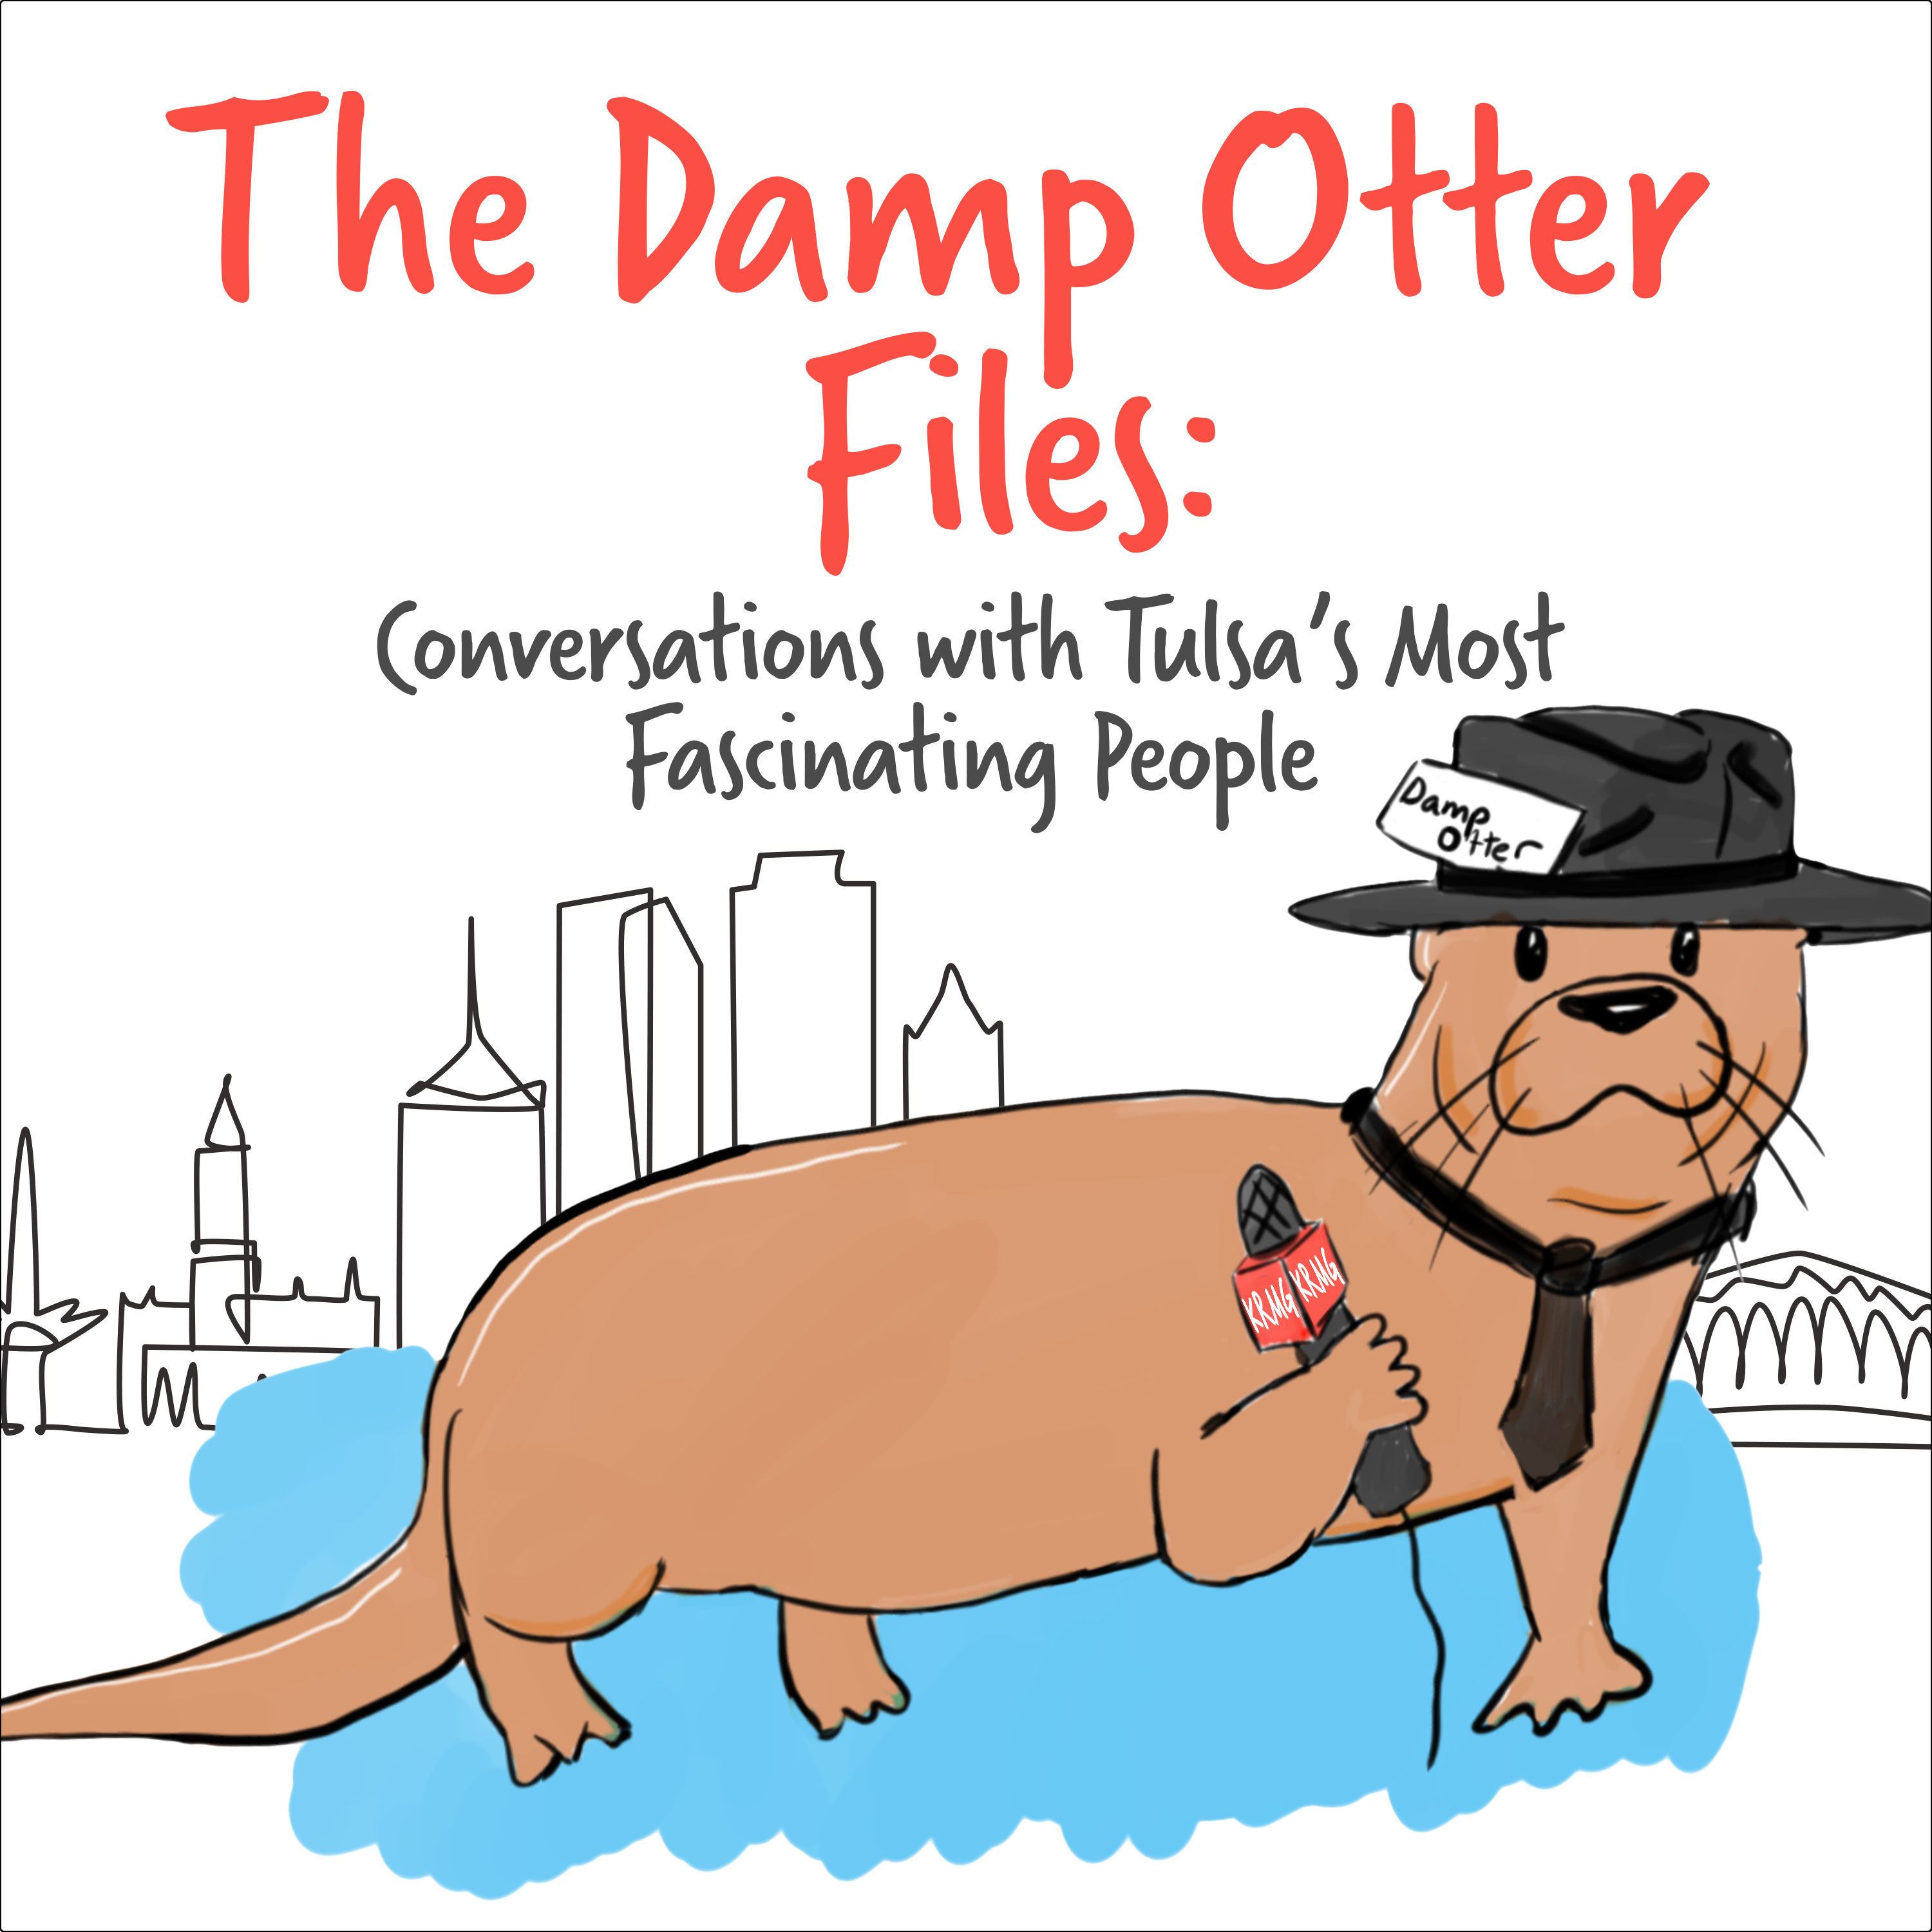 The Damp Otter Files: Conversations with Tulsa's Most Fascinating People